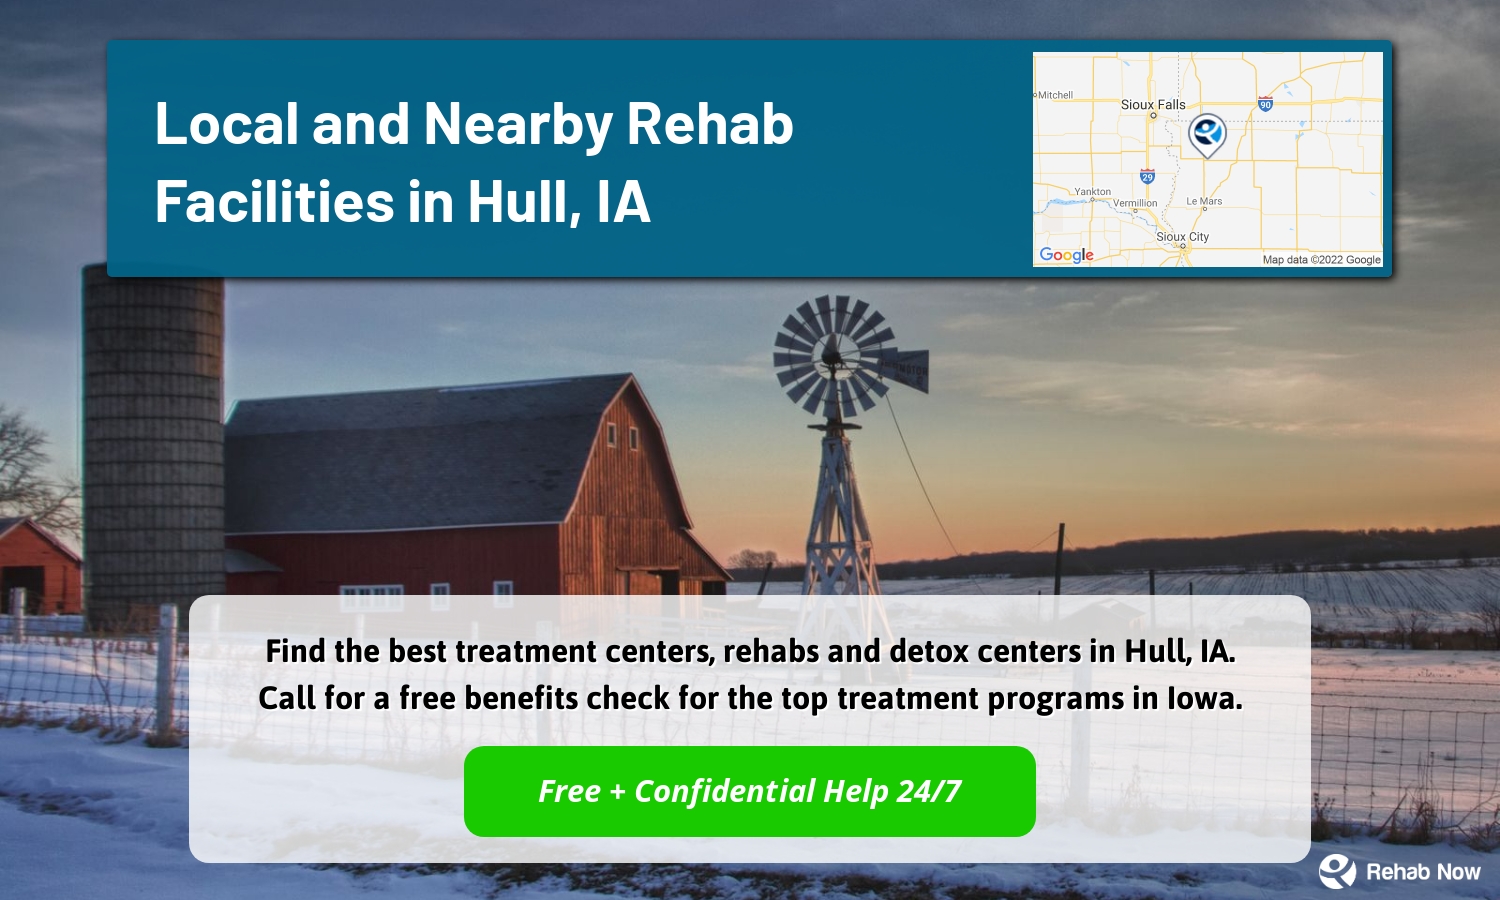 Find the best treatment centers, rehabs and detox centers in Hull, IA. Call for a free benefits check for the top treatment programs in Iowa.